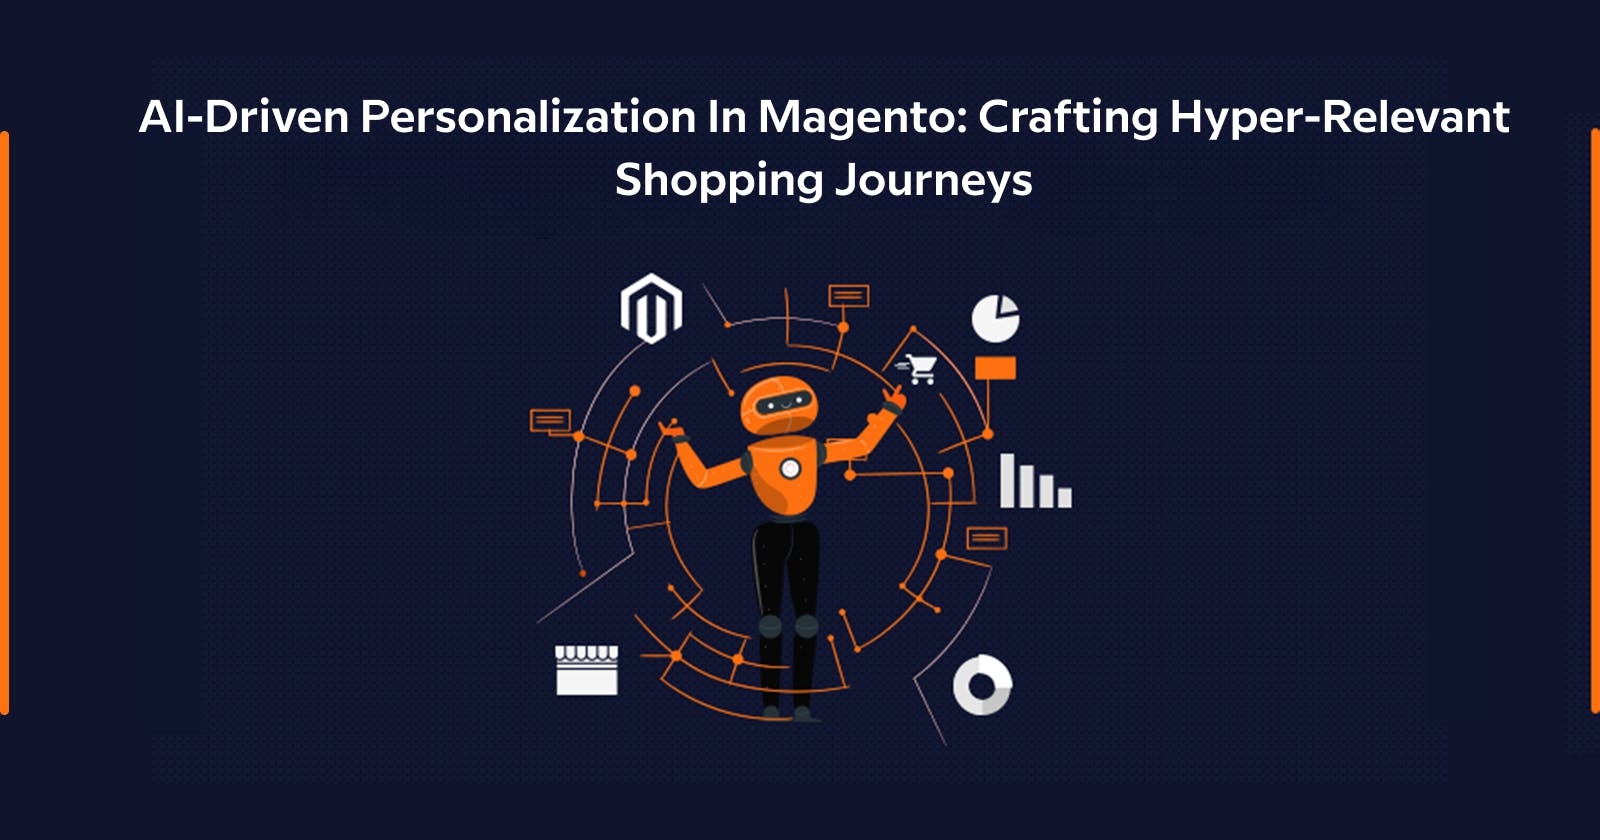 AI-Driven Personalization in Magento: Crafting Hyper-Relevant Shopping Journeys